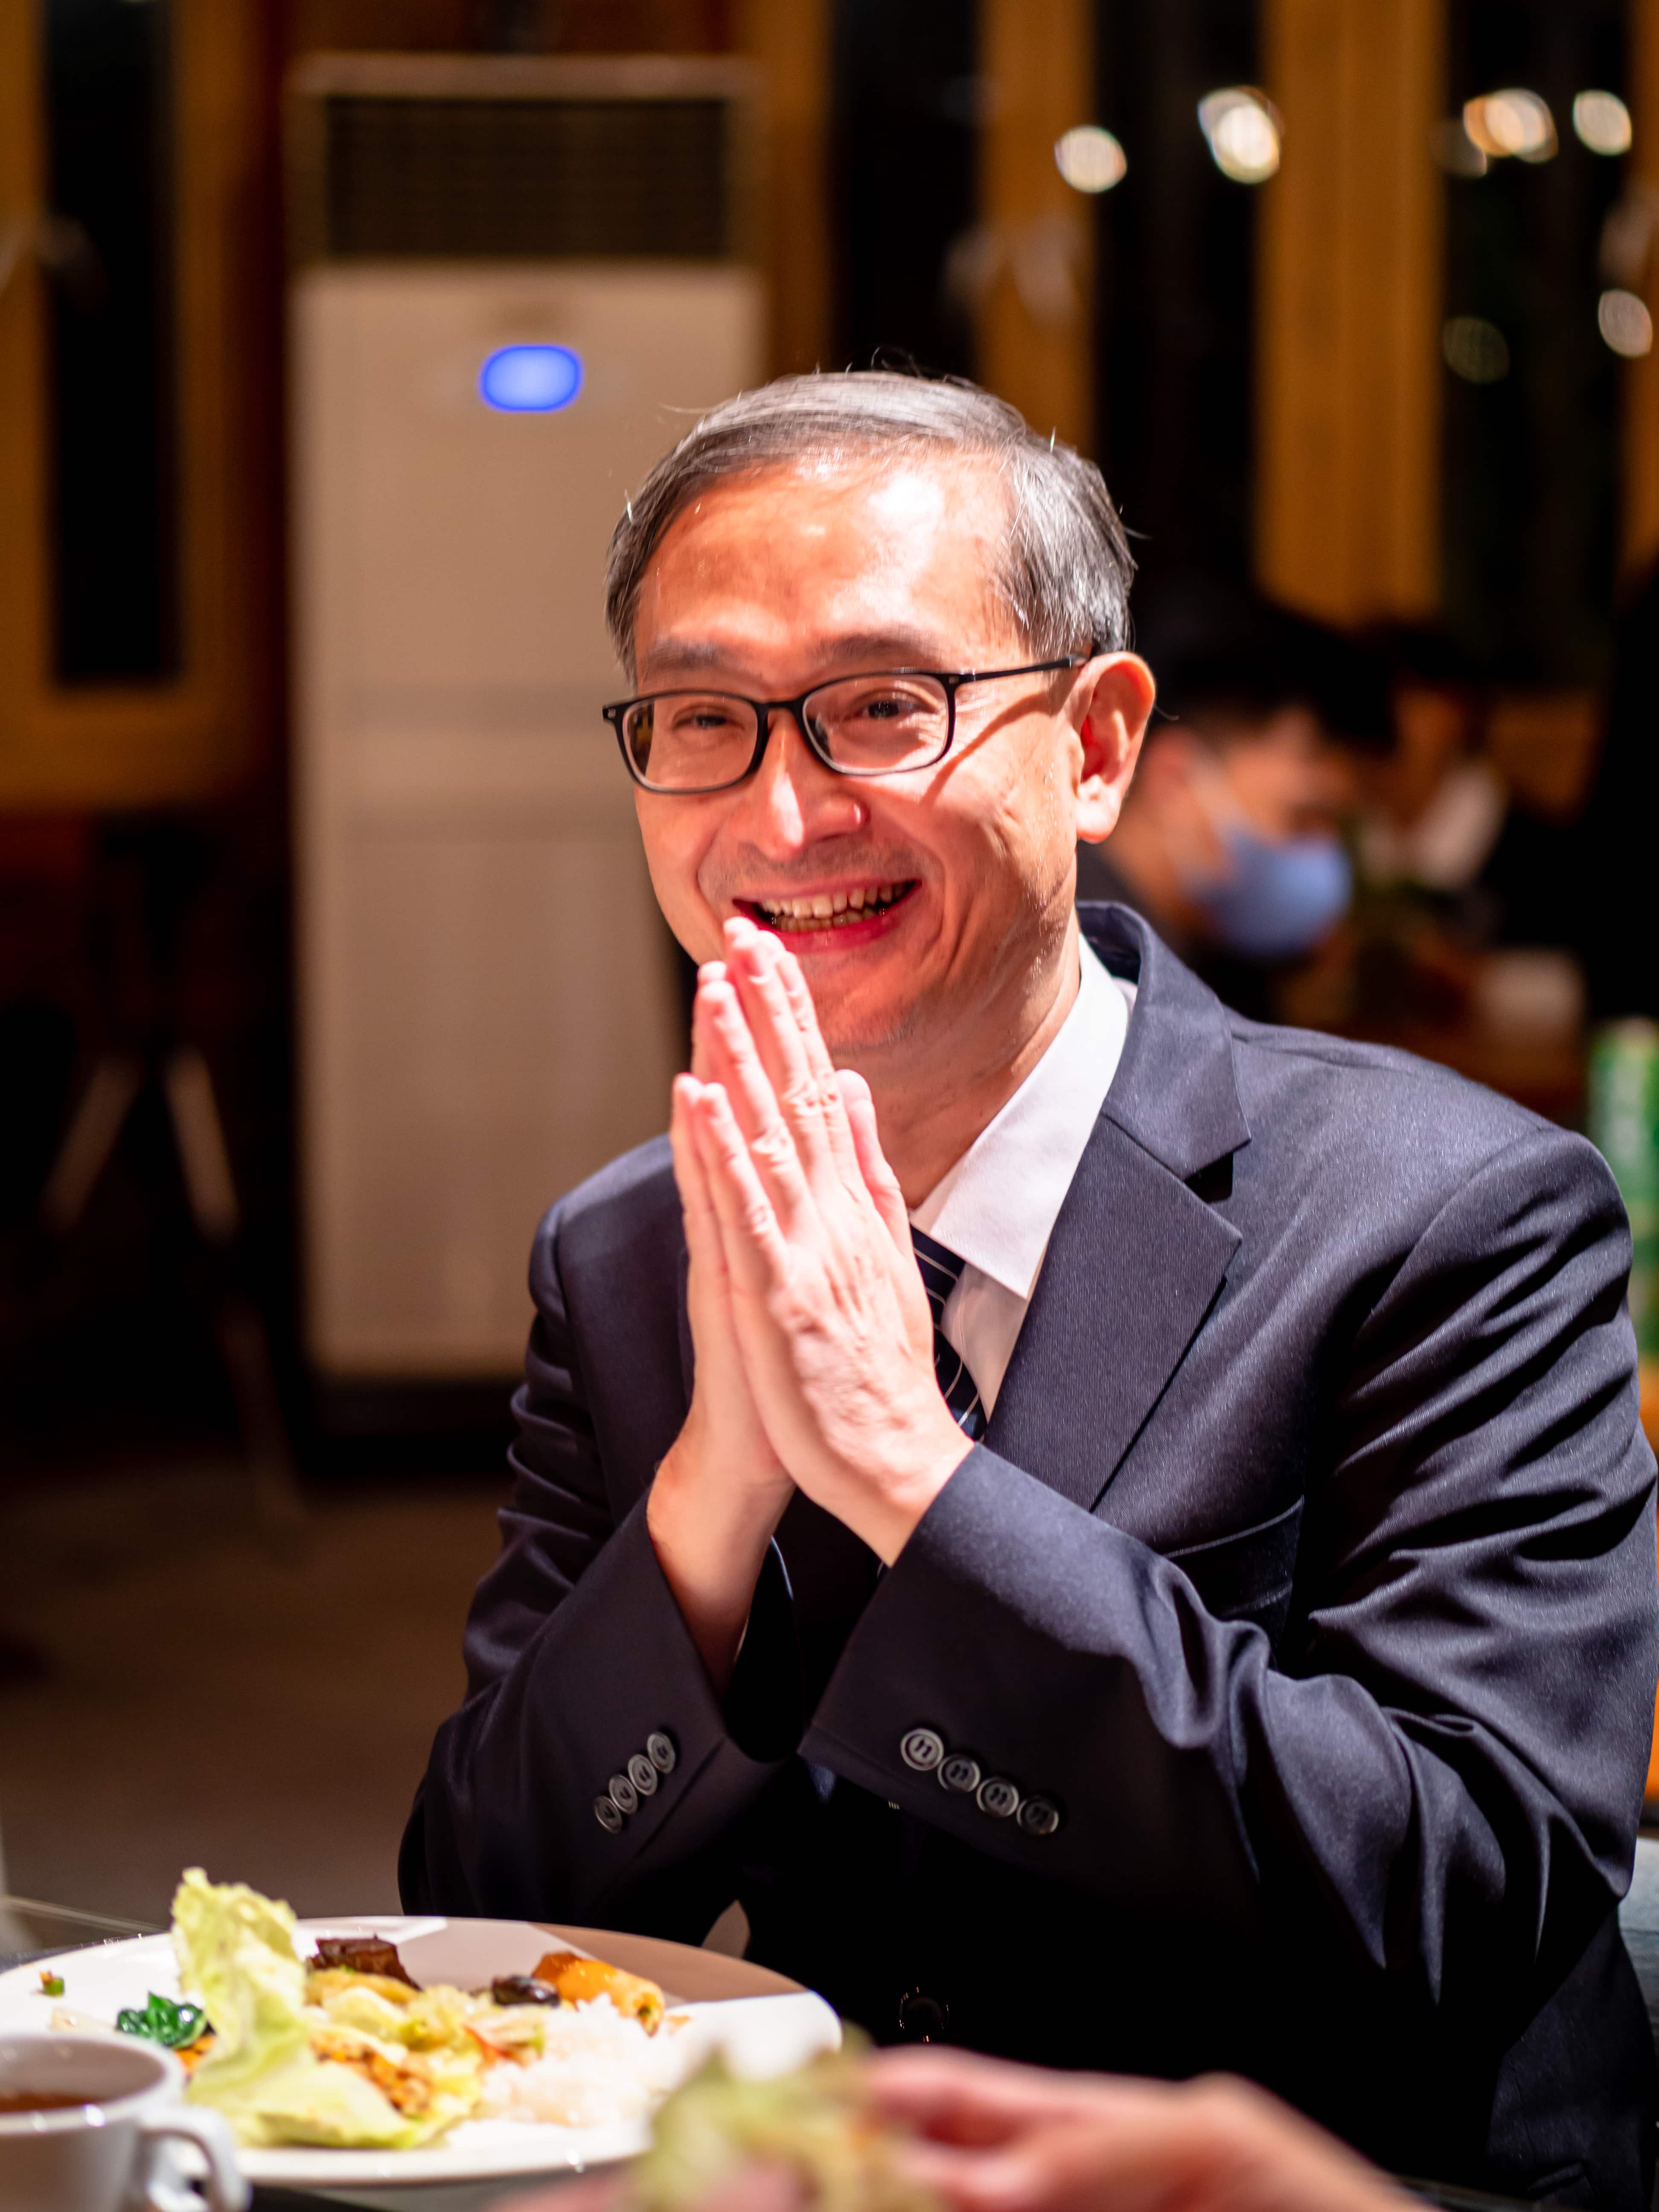 Dr. Li greeting guests in the Coffee Shop.【Photo by Daniel Lazar】